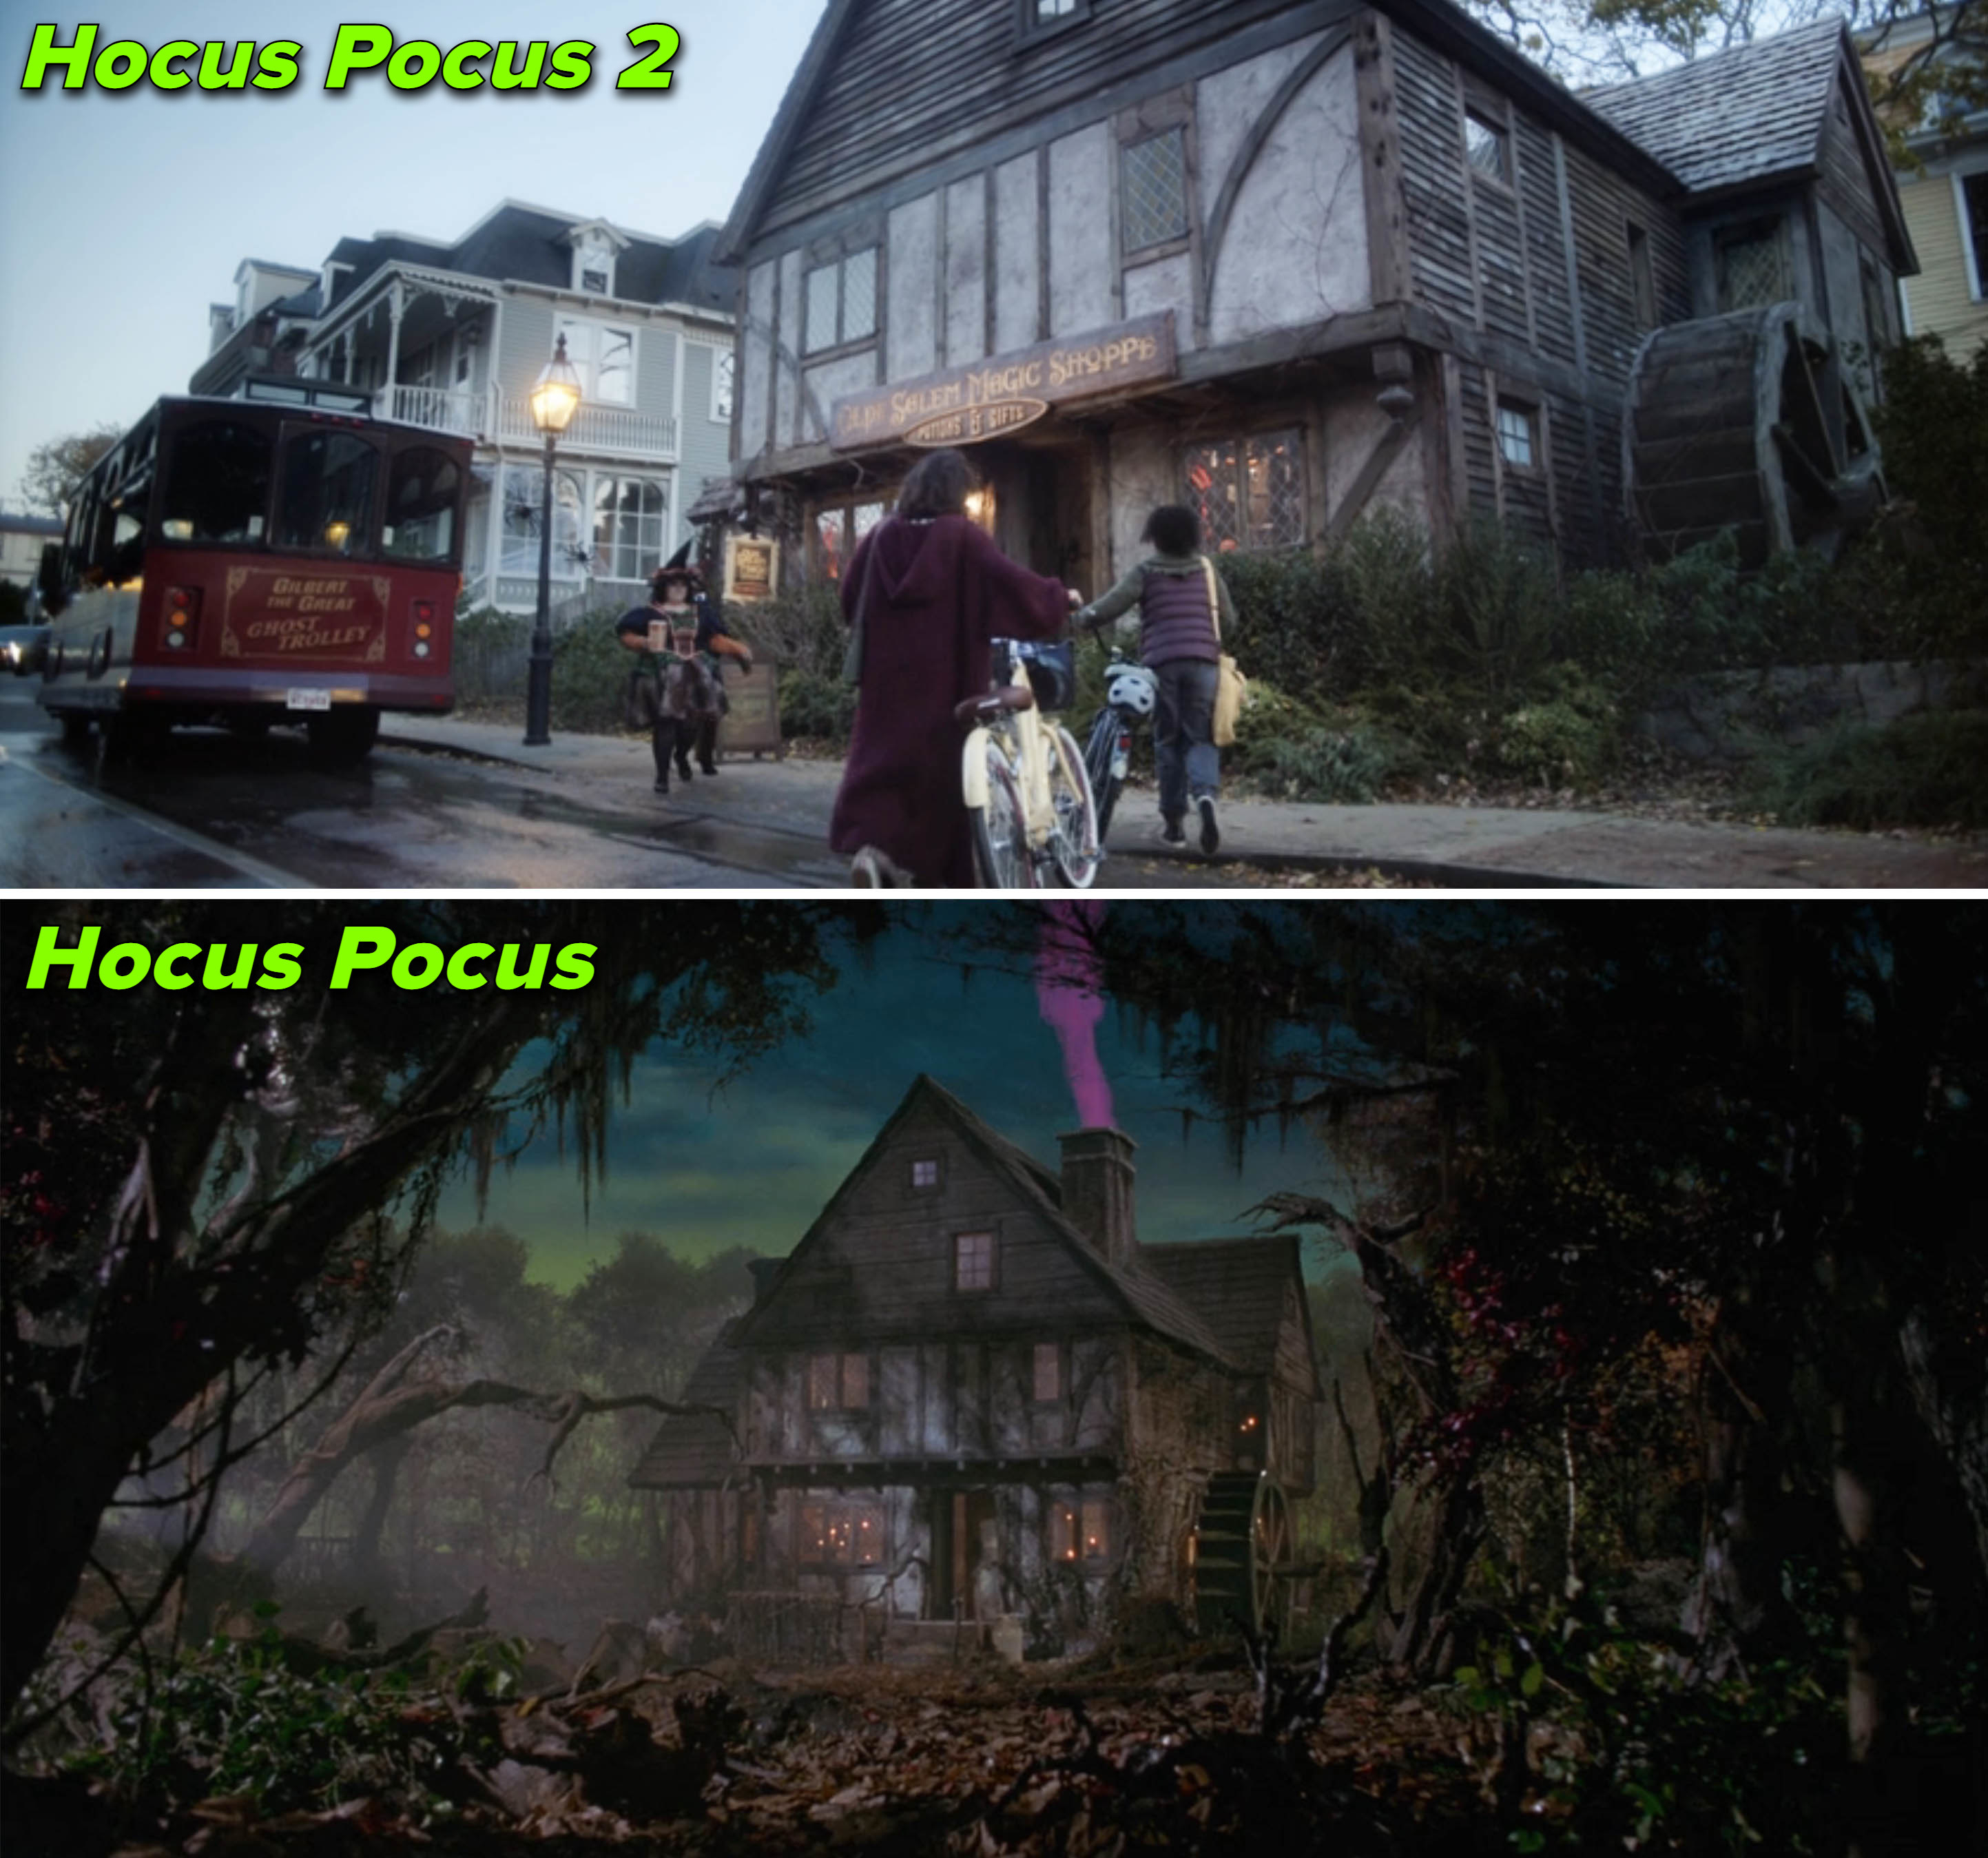 The house looking desolate in the original movie and restored on a busy street in Hocus Pocus 2